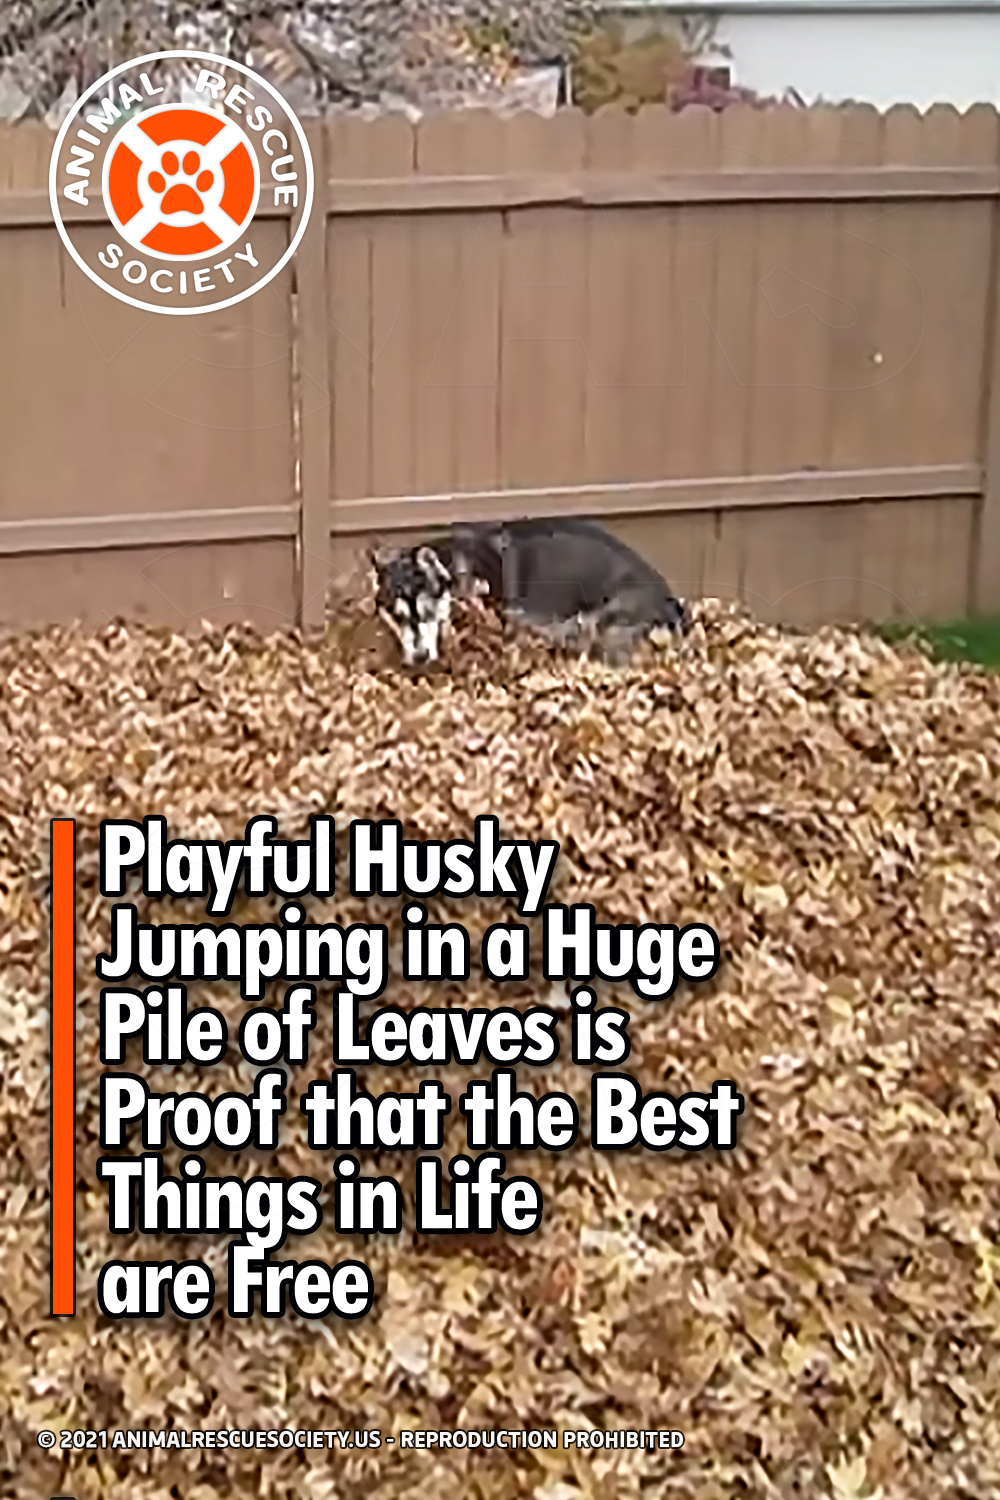 Playful Husky Jumping in a Huge Pile of Leaves is Proof that the Best Things in Life are Free